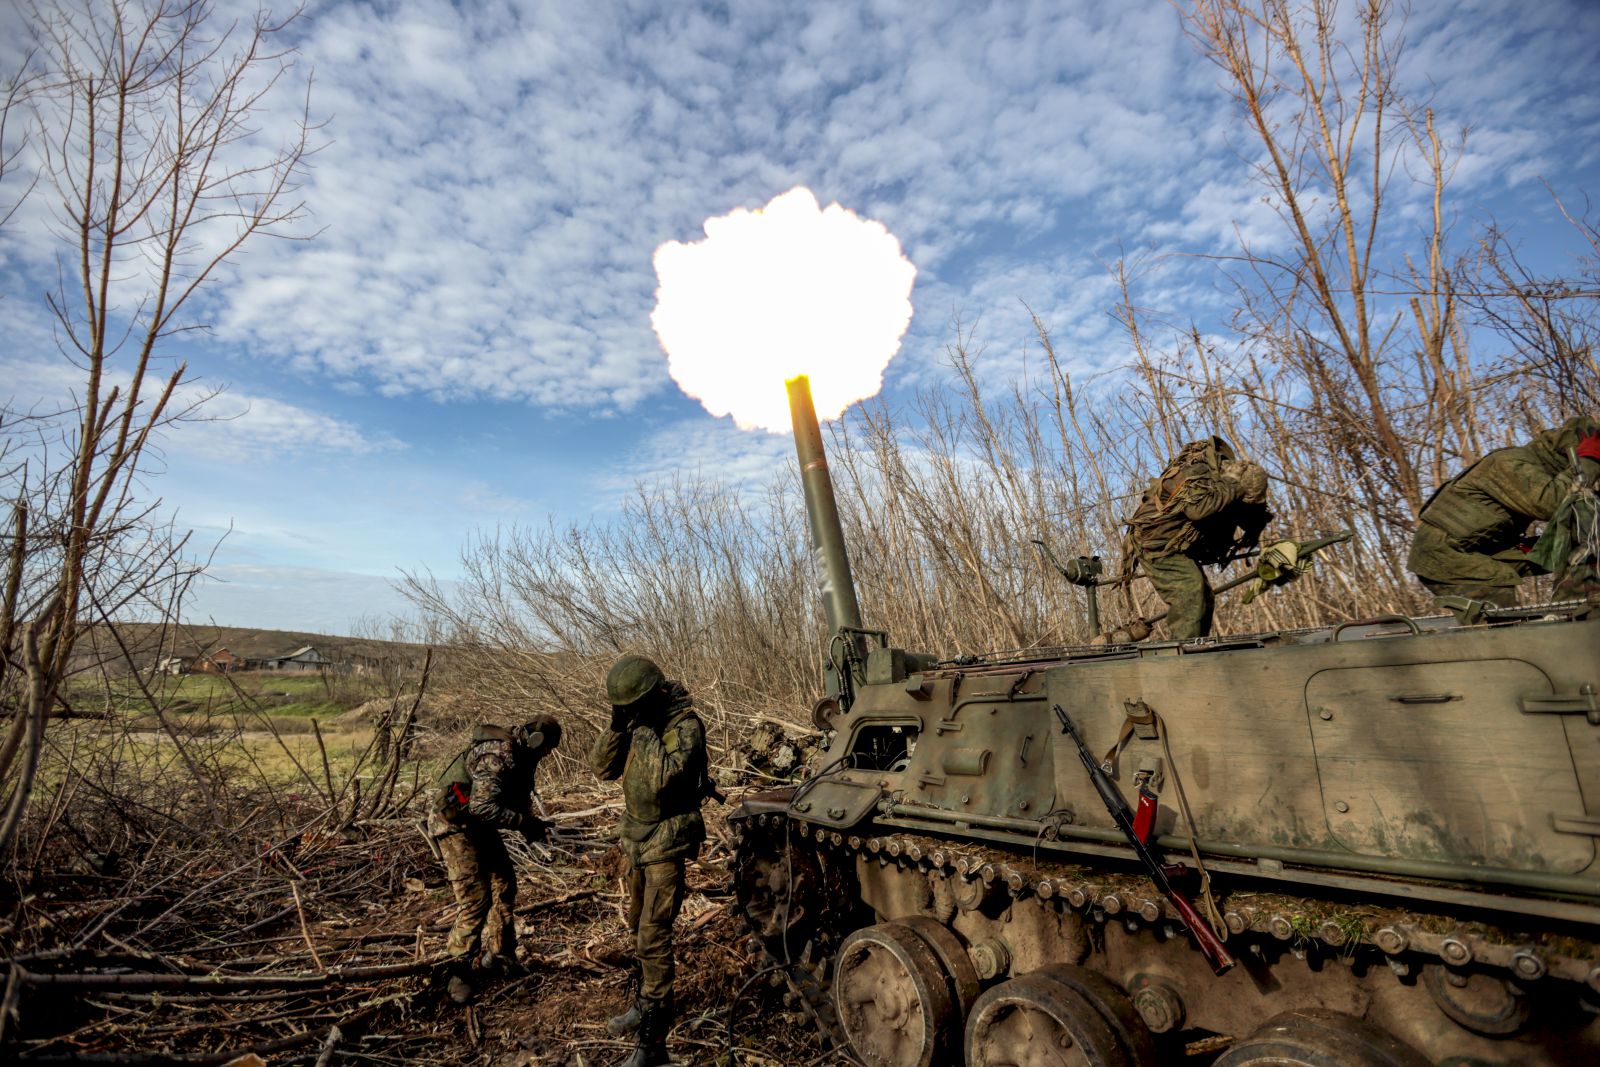 epa10481388 (FILE) - Forces of the self-proclaimed Donetsk People's Republic fire a self-propelled mortar 2S4 'Tulip' not far from Bakhmut, Donetsk region, Ukraine, 01 December 2022 (reissued 21 February 2023). Russian troops on 24 February 2022, entered Ukrainian territory, starting a conflict that has provoked destruction and a humanitarian crisis. One year on, fighting continues in many parts of the country.  EPA/ALESSANDRO GUERRA  ATTENTION: This Image is part of a PHOTO SET